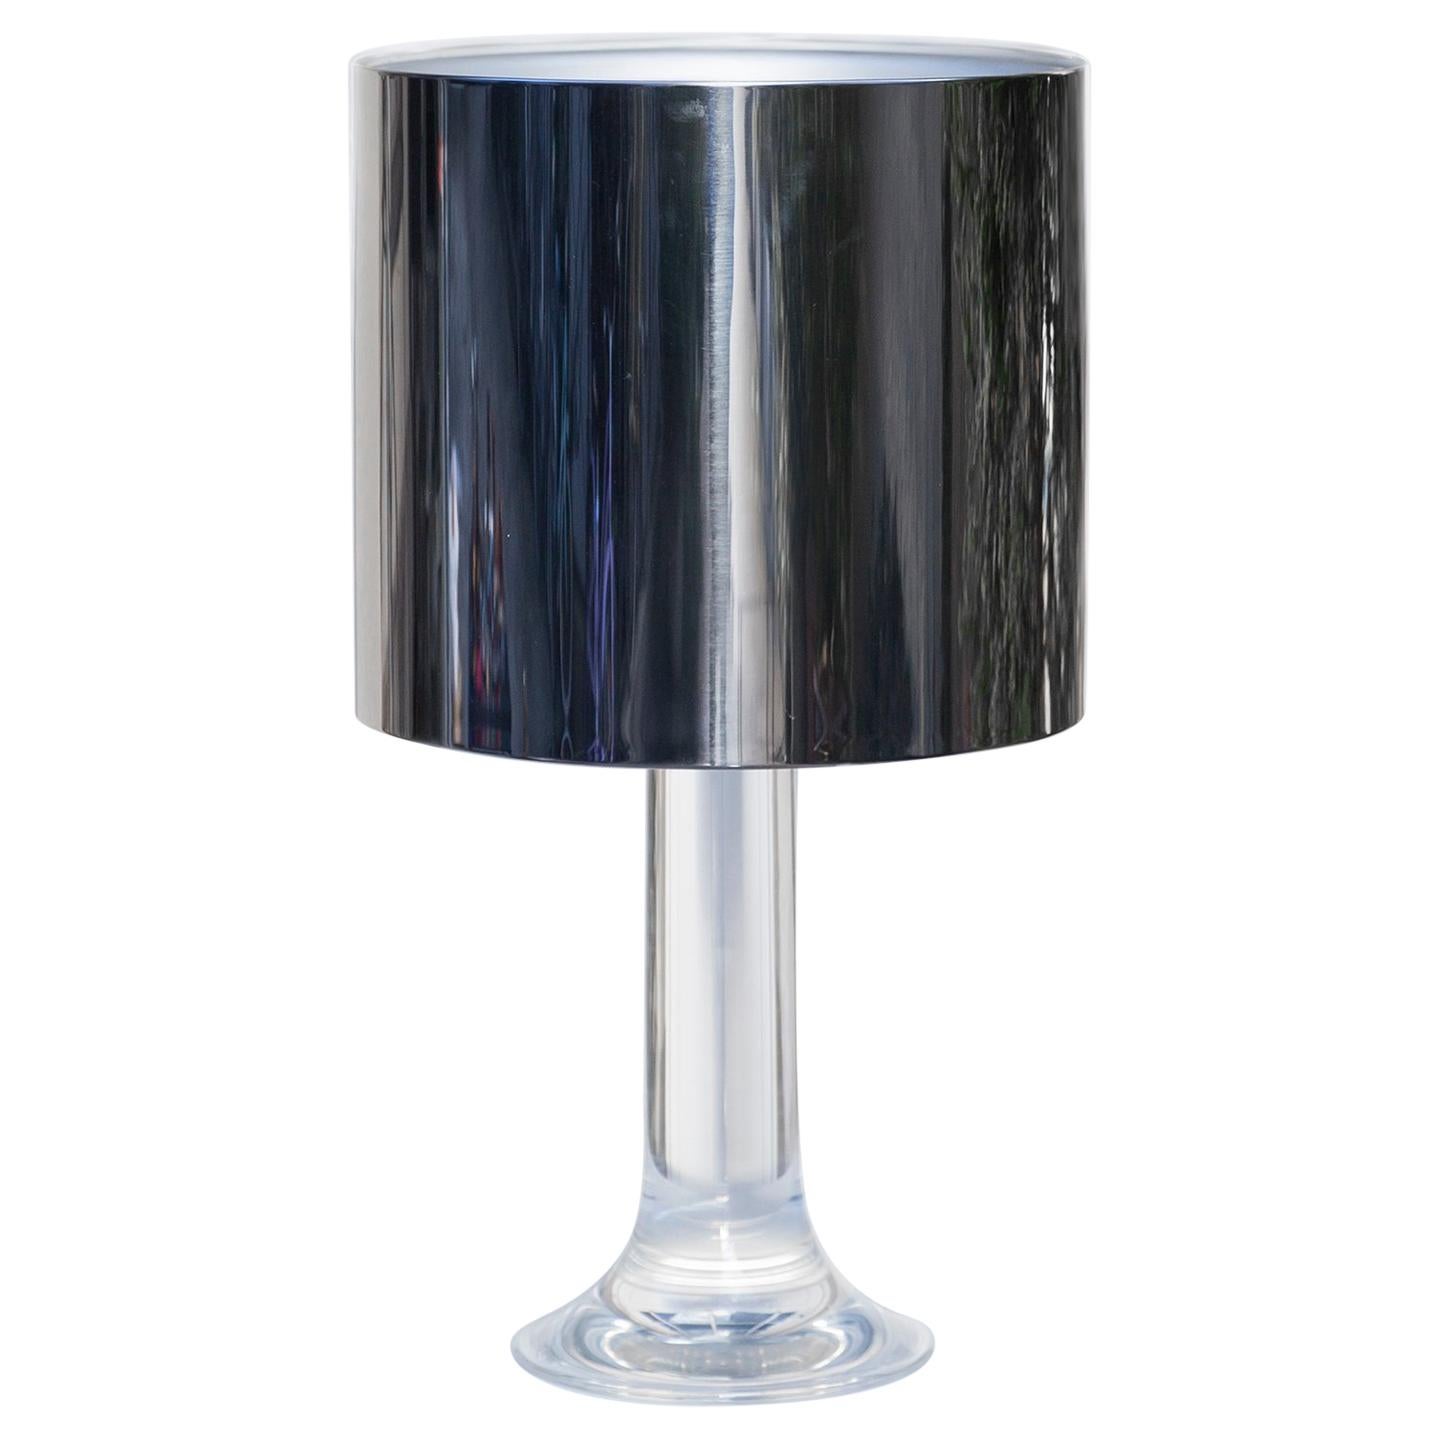 Harvey Guzzini Lucite Table Lamp with Metal Shade, Italy, 1970s